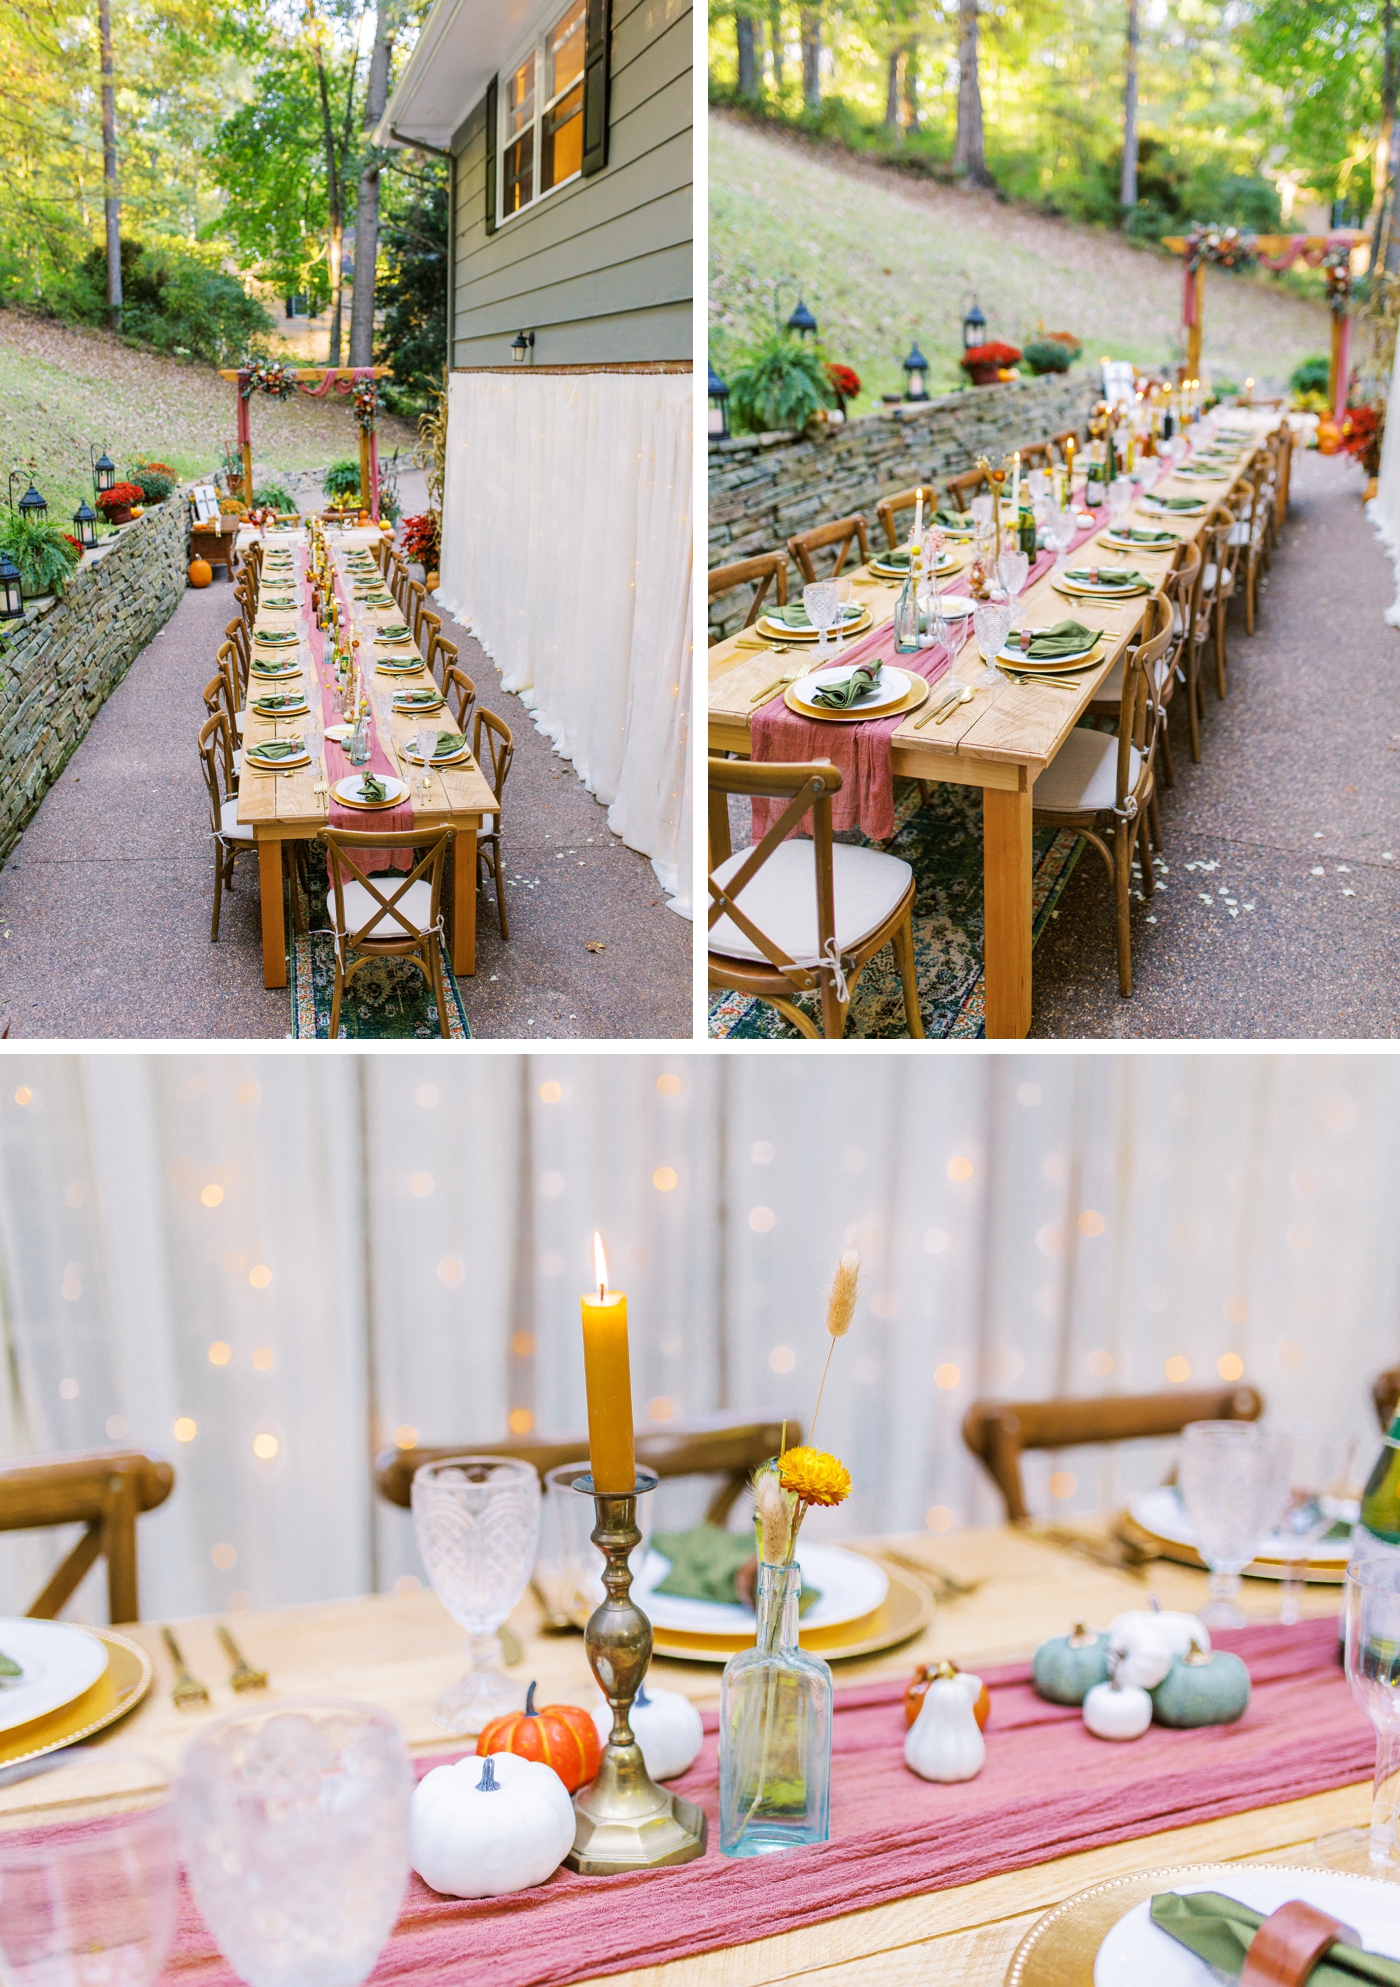 Farm tables lined with dusty burgundy fabric and tapered candles